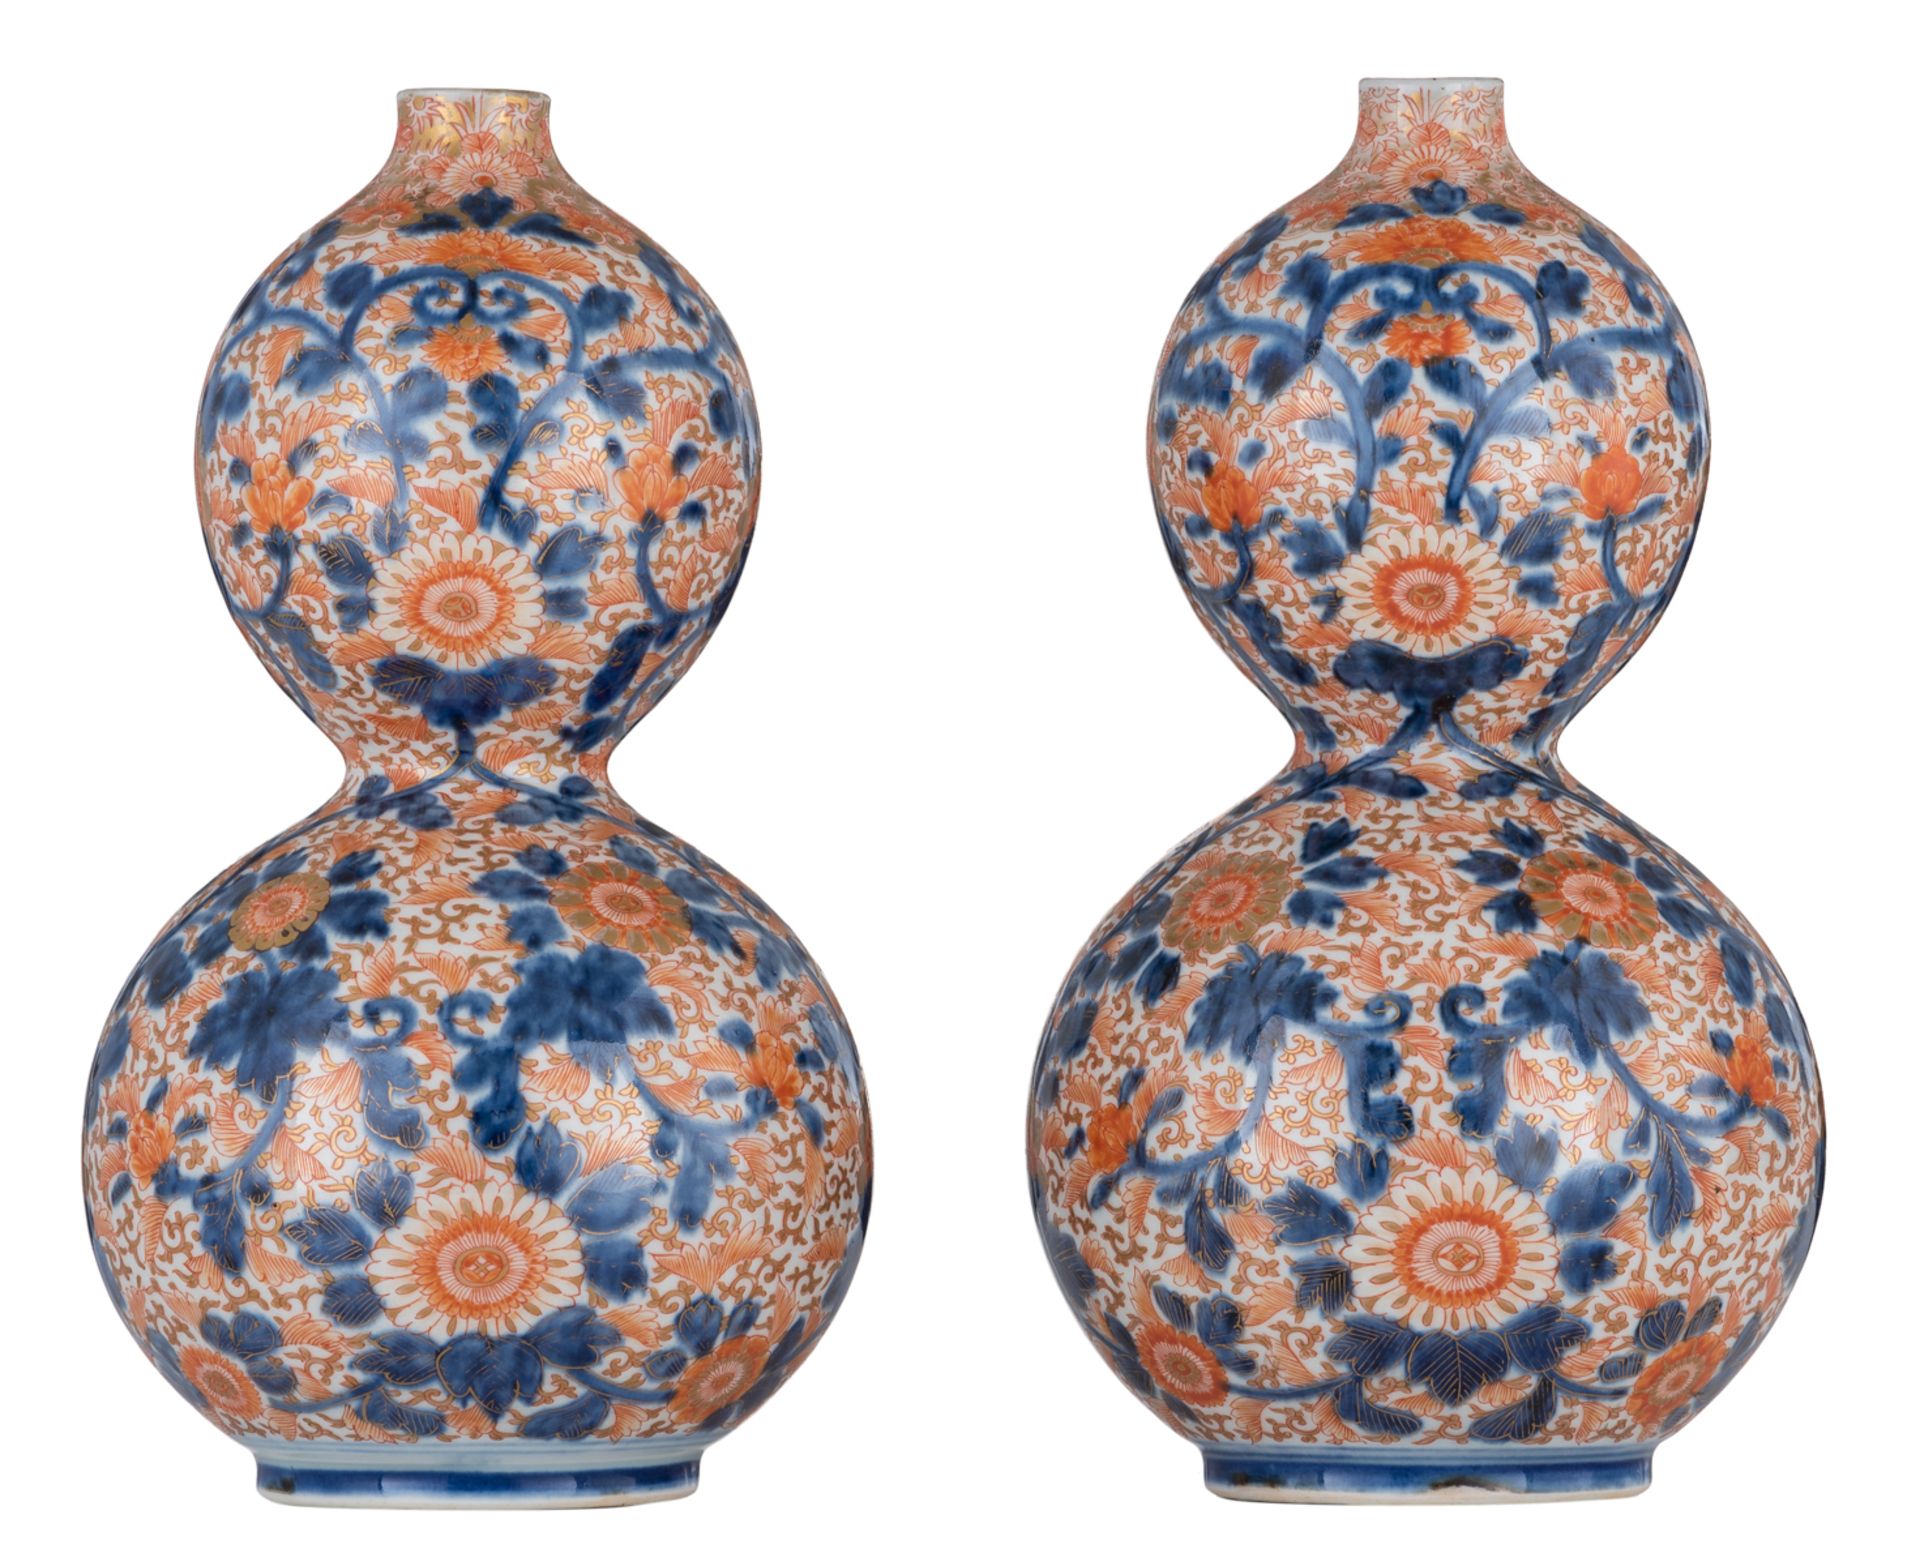 A fine pair of two Japanese Arita Imari double gourd vases, decorated with flower branches, later 18